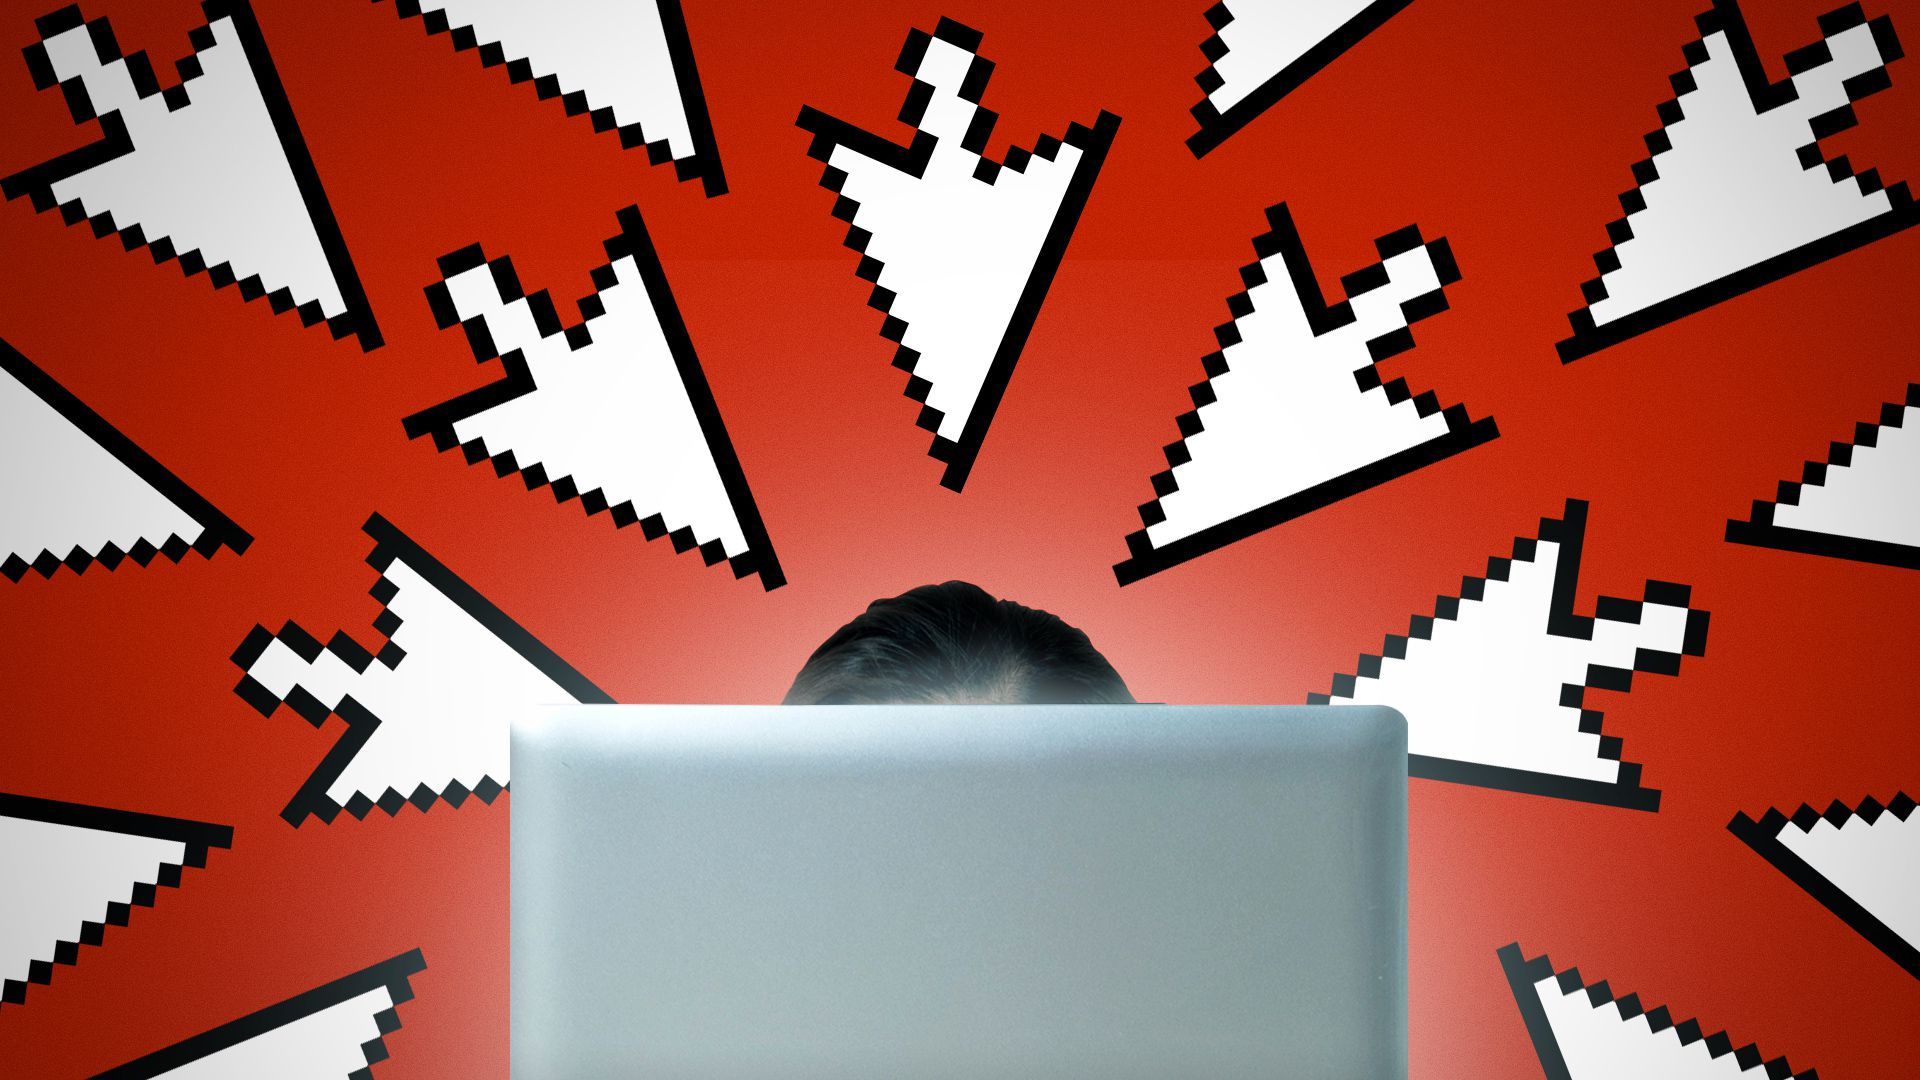 Illustration of a person behind a laptop screen with numerous cursors surrounding them and pointed towards their head.